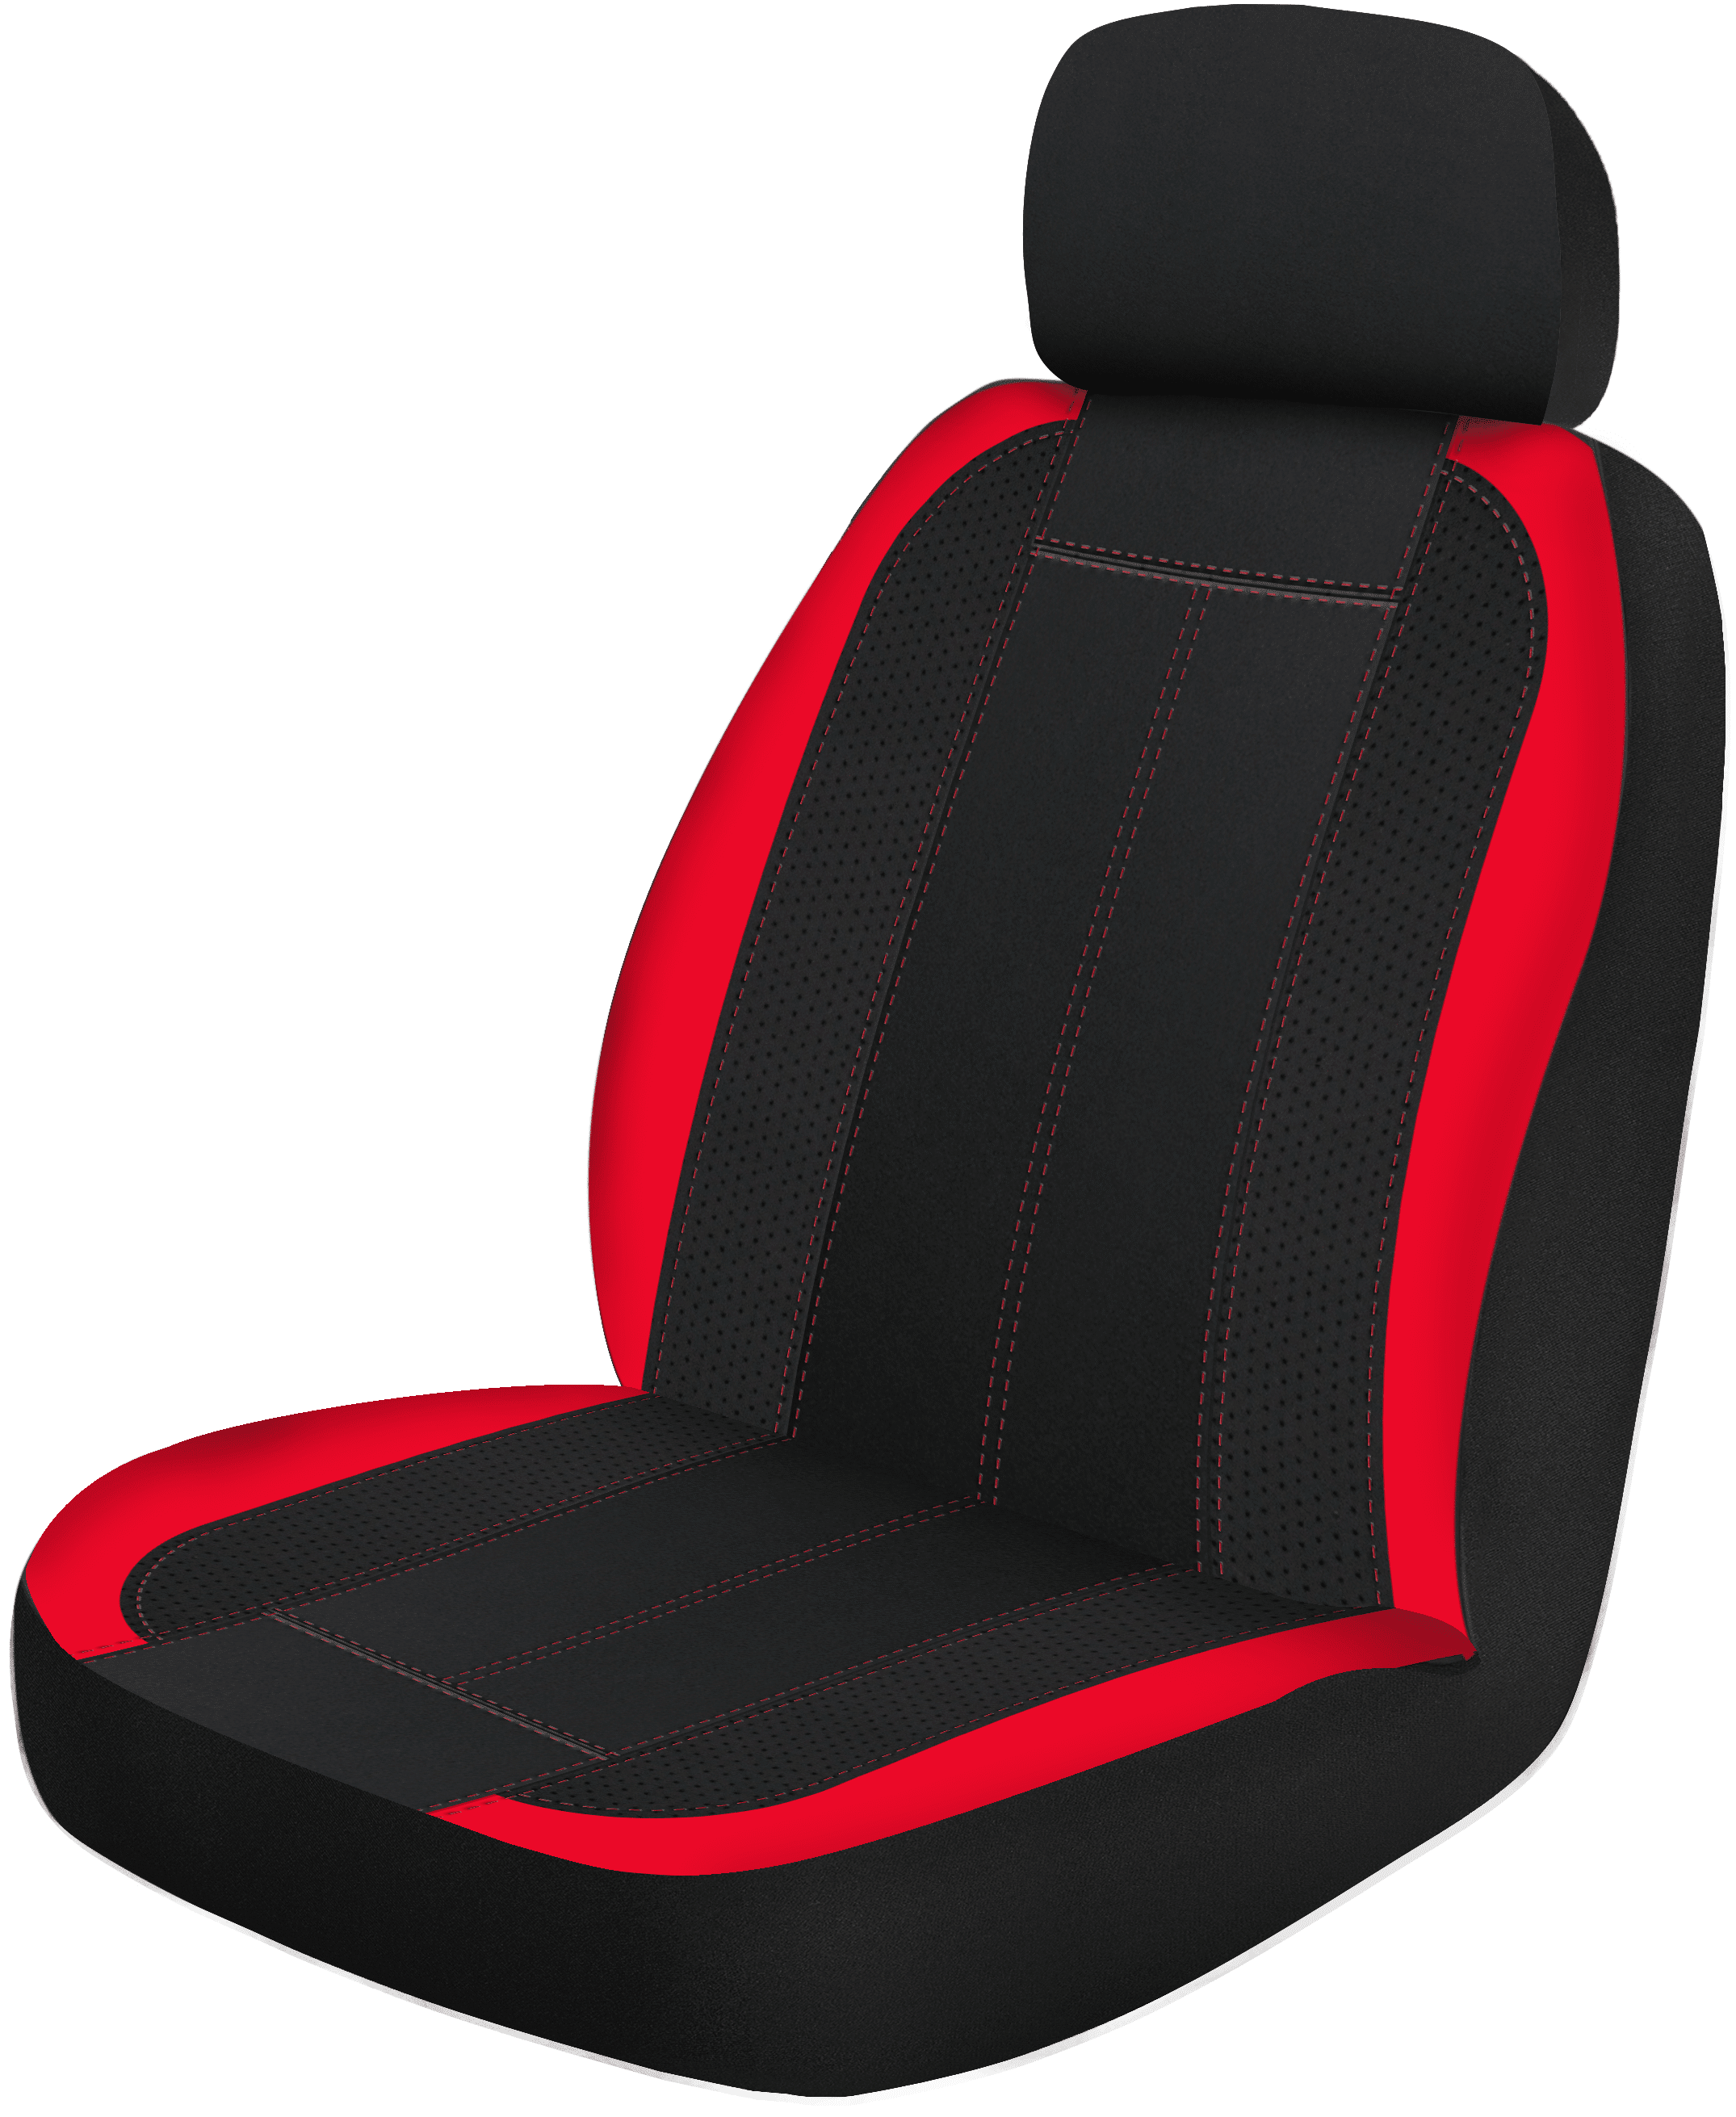 Black/Red PU Leather Car Seat 2-Tone Covers Sport Auto Car 5 Headrests Bench 